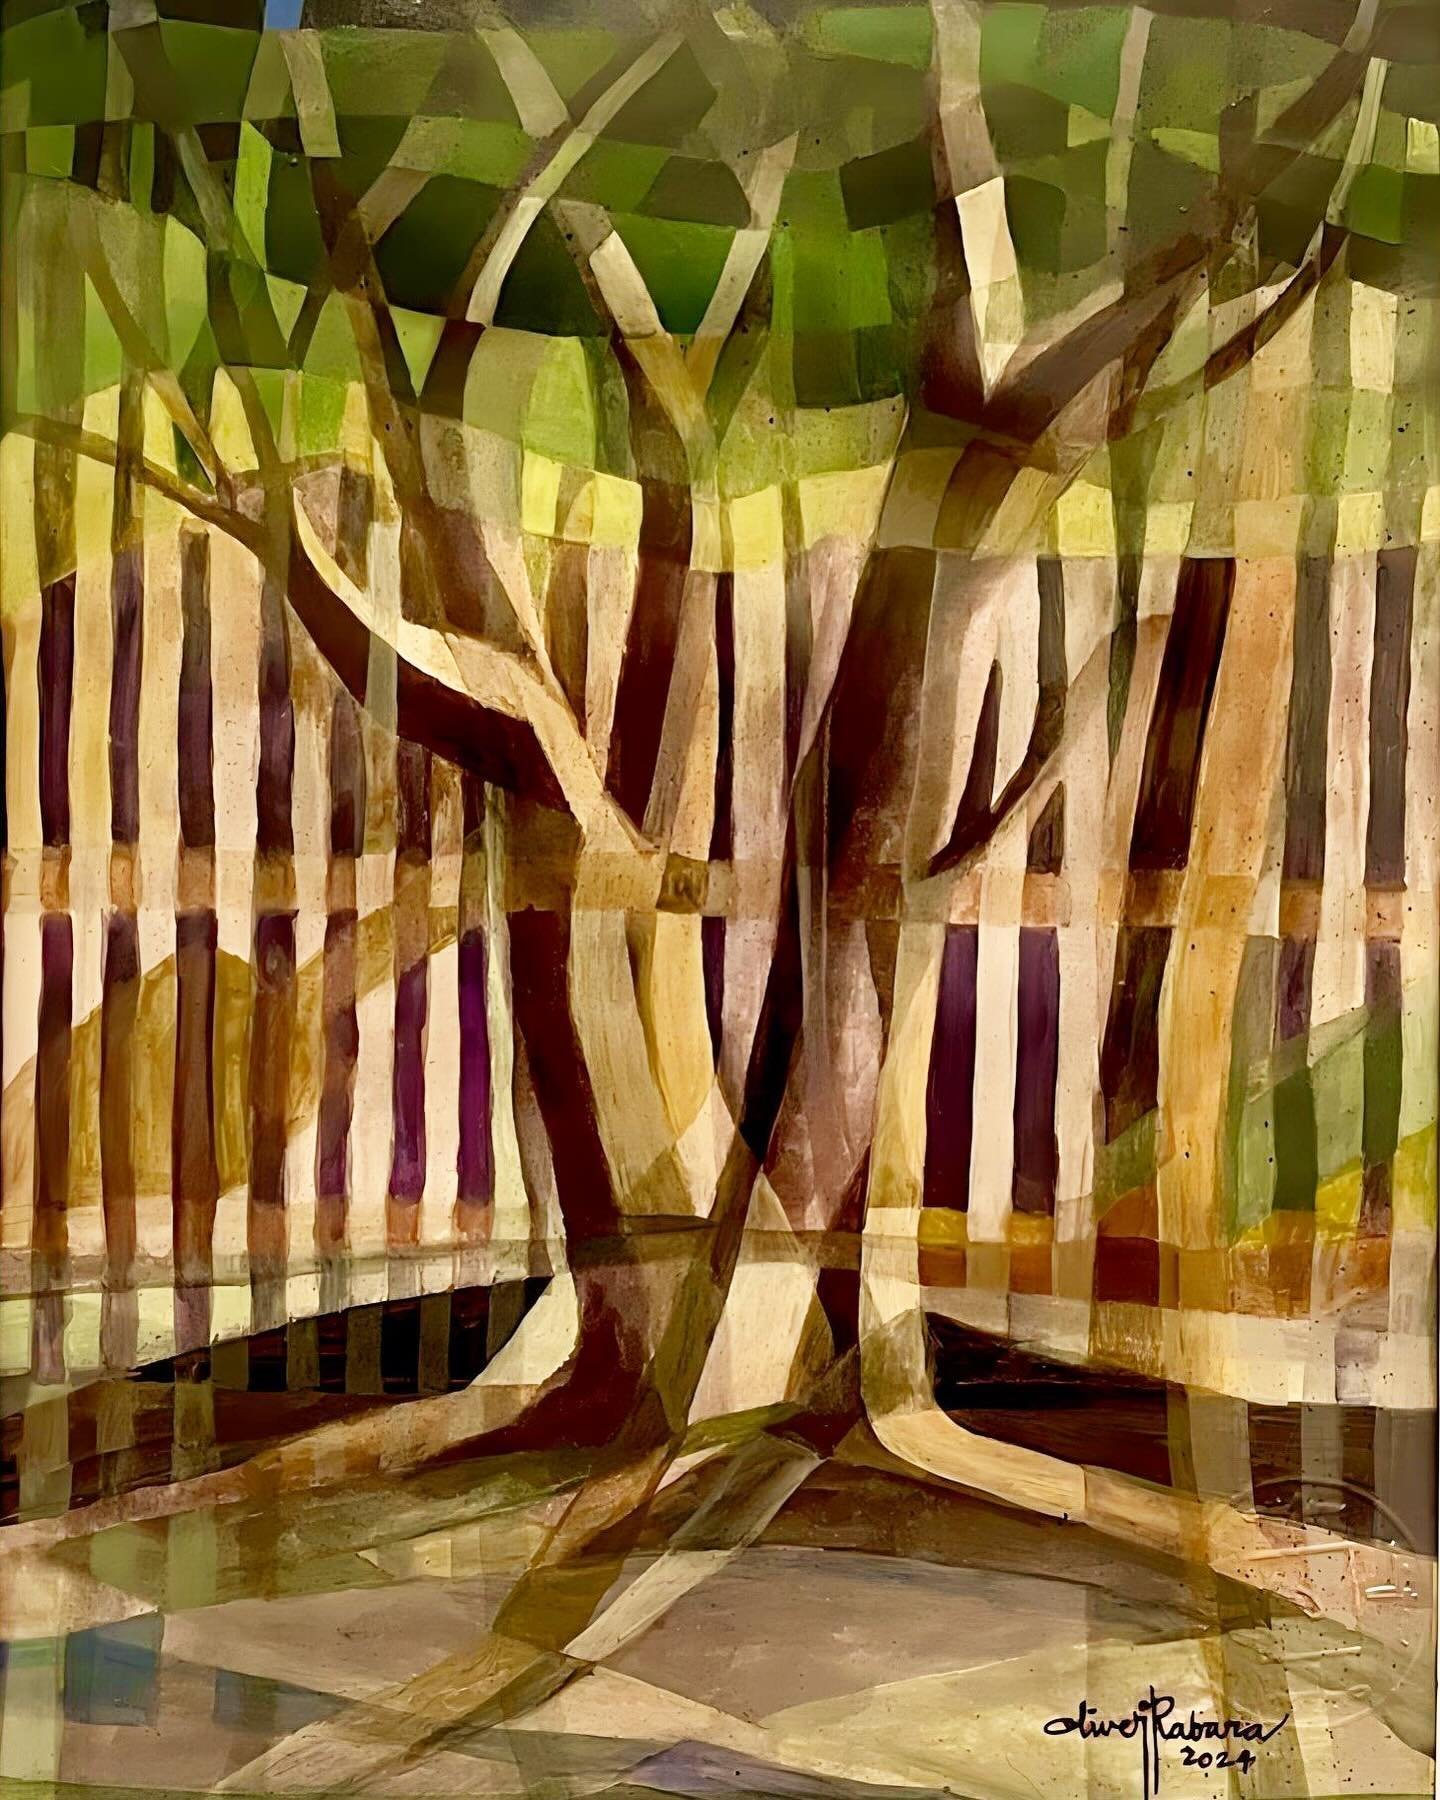 Today&rsquo;s FORM REDUX Exhibit Art Feature:

Sinait Tree by Oliver Rabara, Watercolour / Acrylic Mixed Media, 18x22, $600

Doing the redux is liberating.  I was imprisoned within my initial watercolor version of this work.  I was not happy with my 